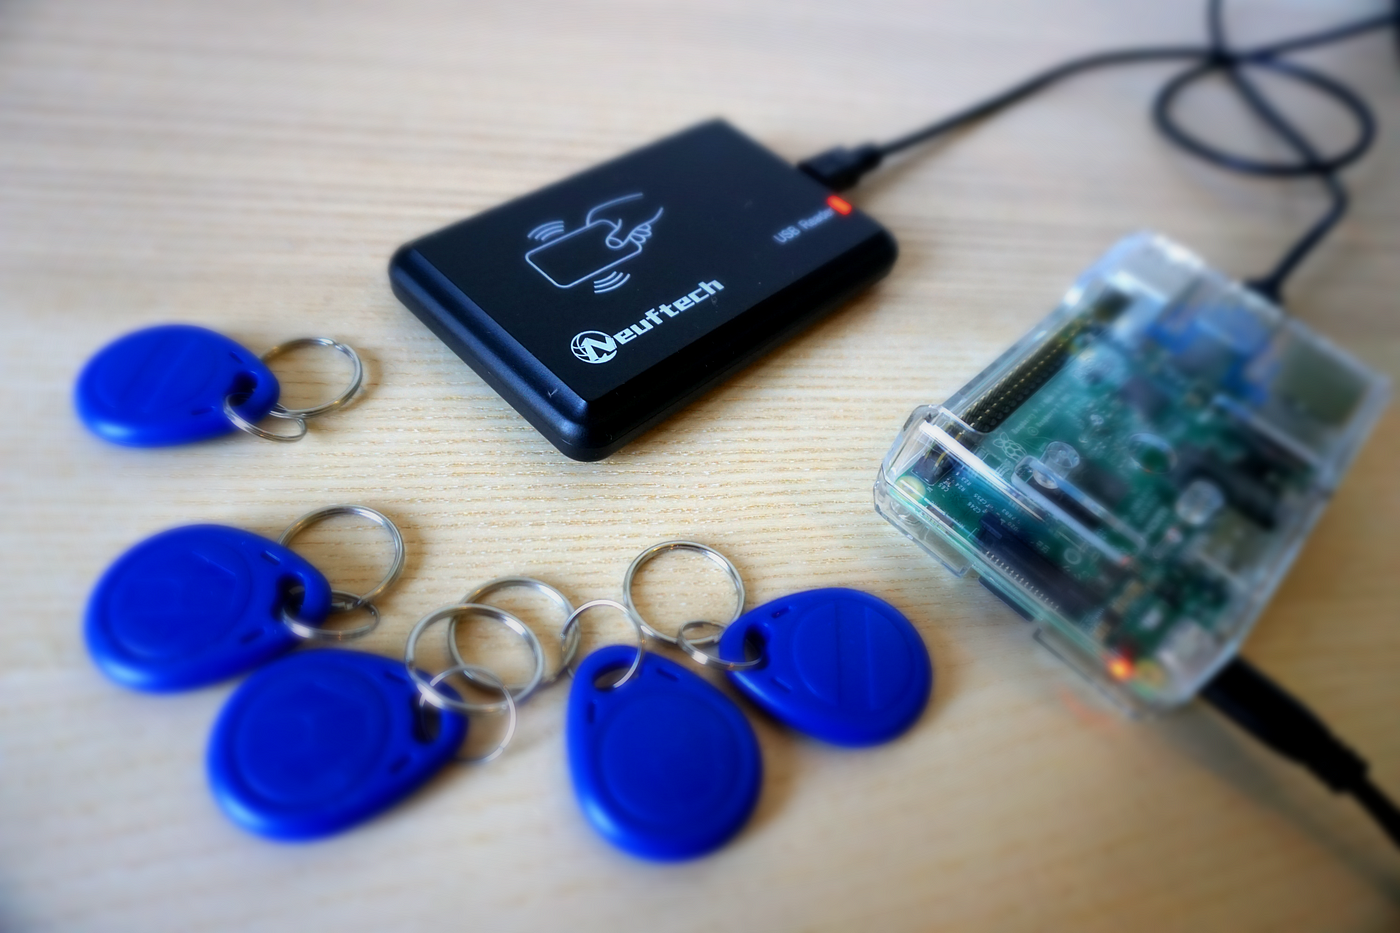 IOT Tutorial: Read RFID-tags with an USB RFID reader, Raspberry Pi and  Node-RED from scratch | by Raphael Bink | Coinmonks | Medium